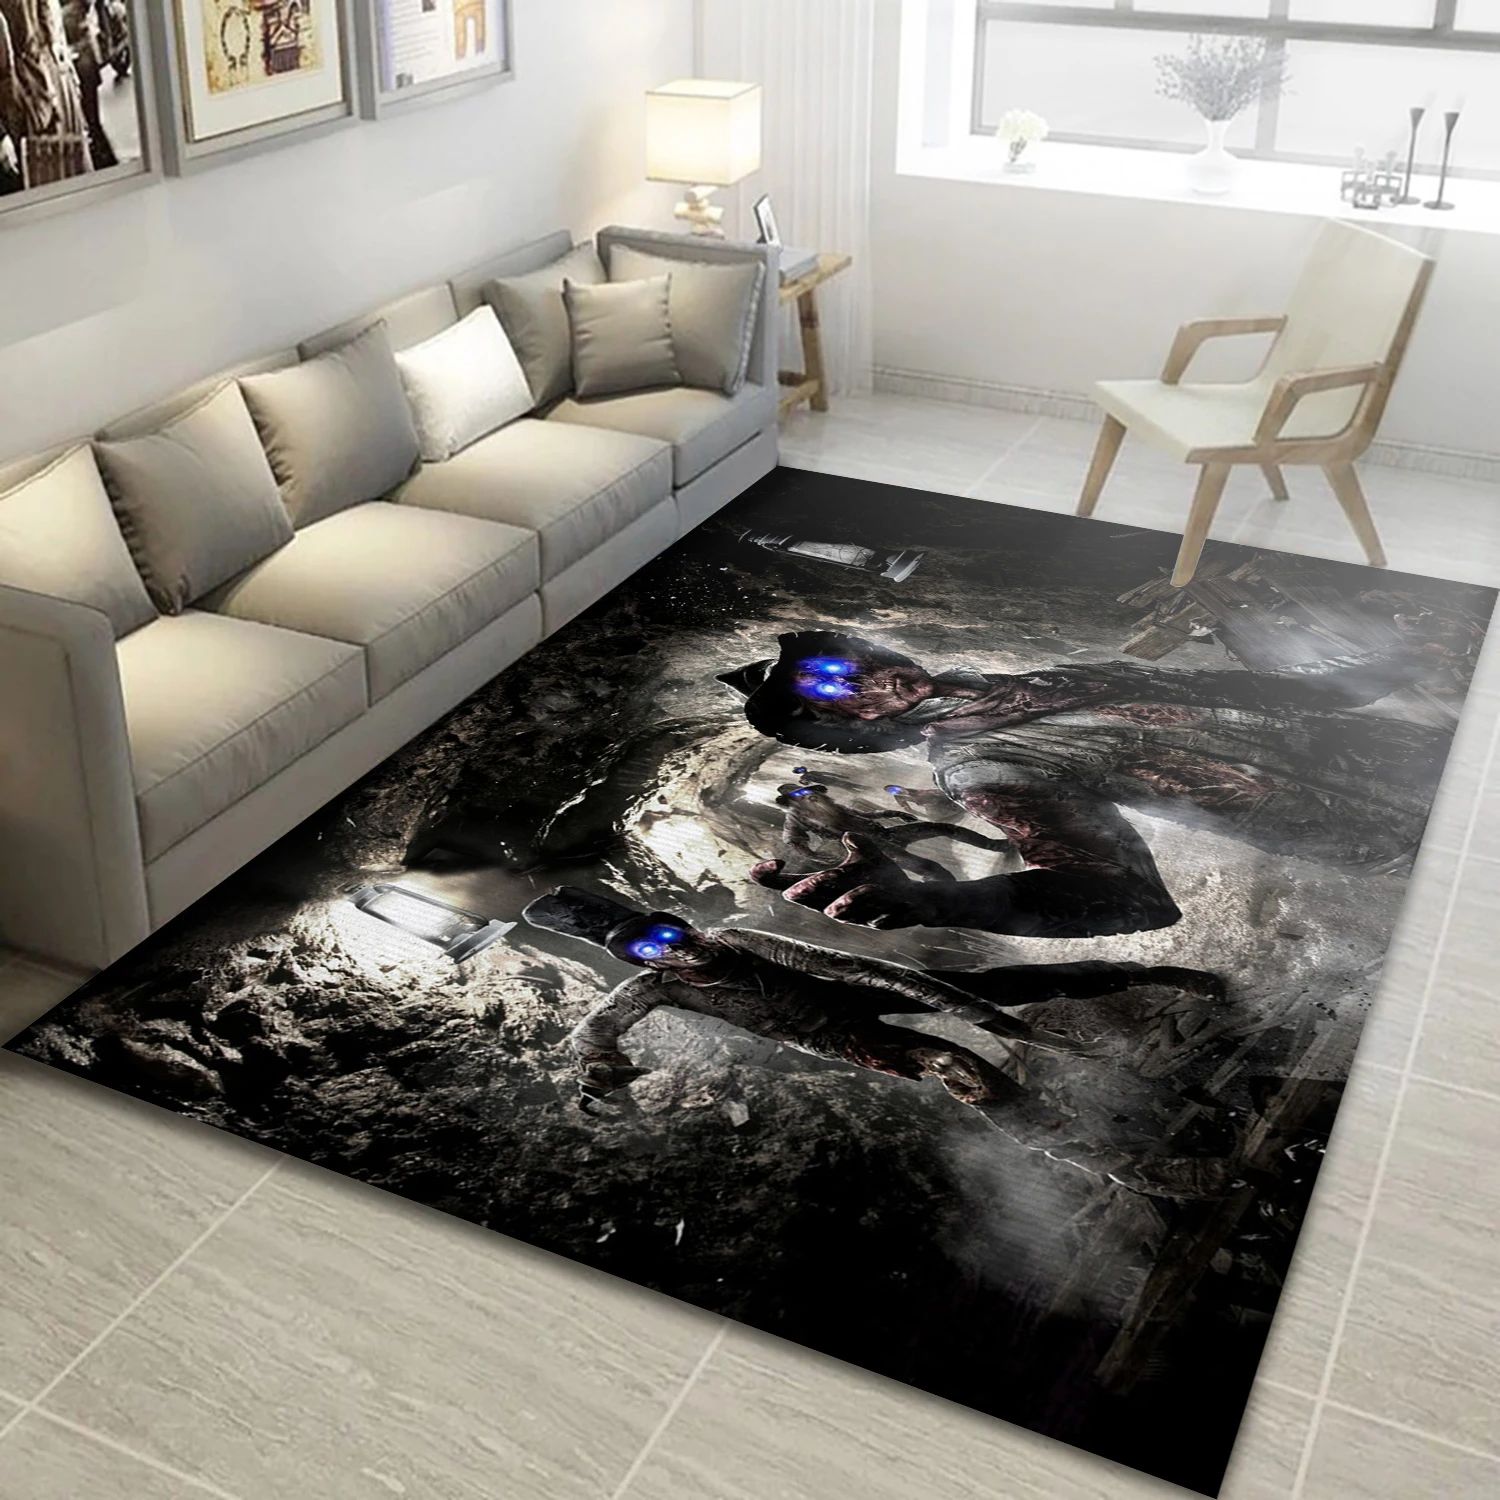 Call Of Duty Black Ops Ii Video Game Area Rug For Christmas, Area Rug - Home Decor Floor Decor - Indoor Outdoor Rugs 3